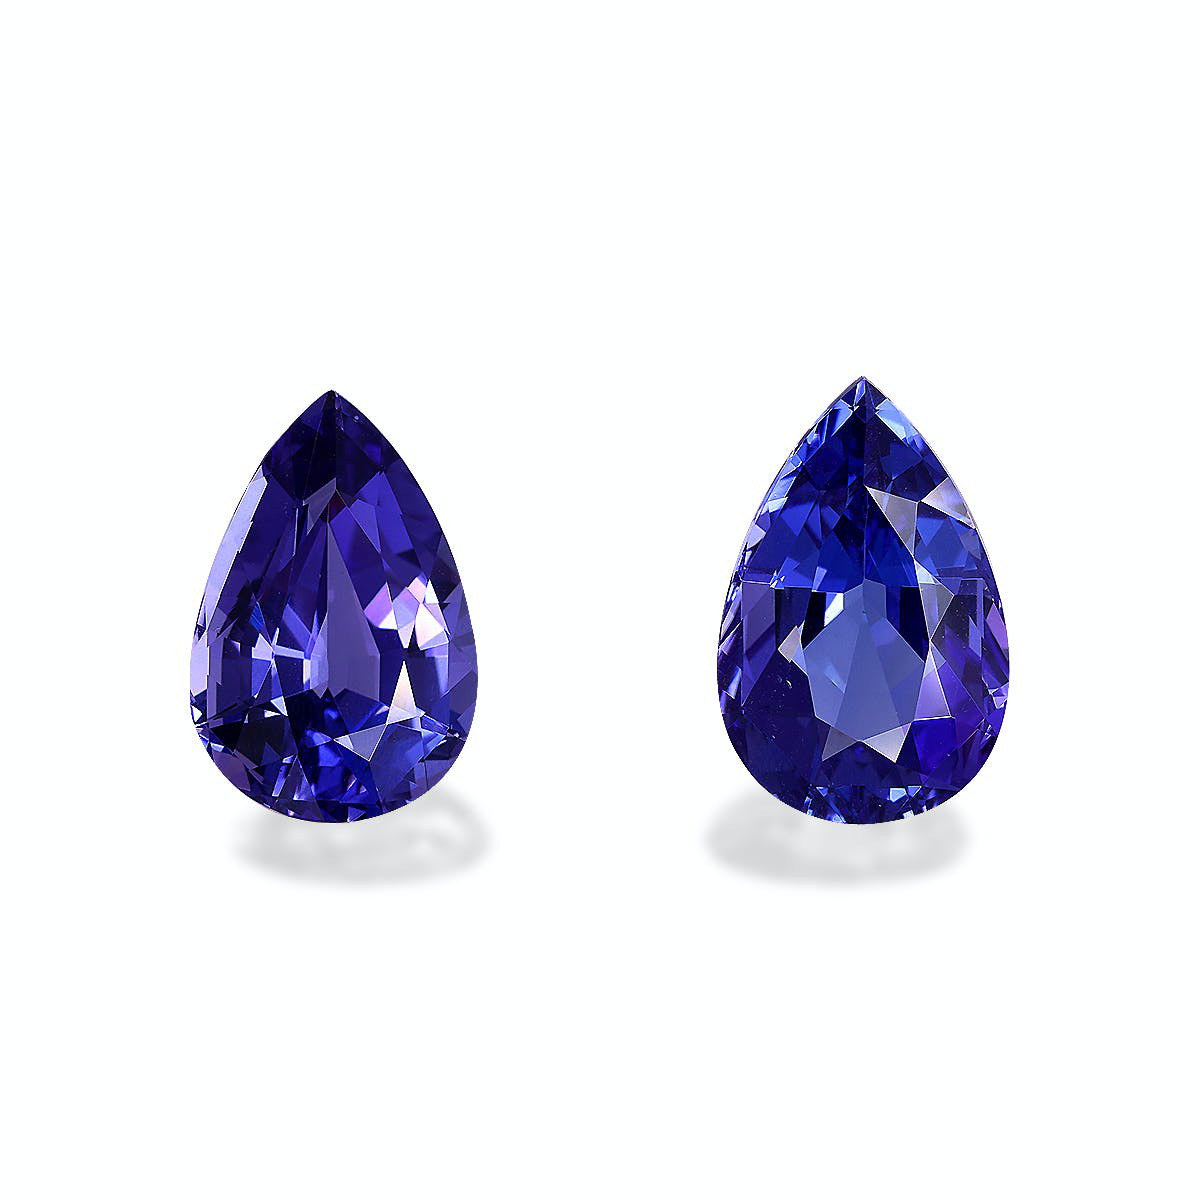 Picture of AAA+ Blue Tanzanite 18.58ct - Pair (TN0691)